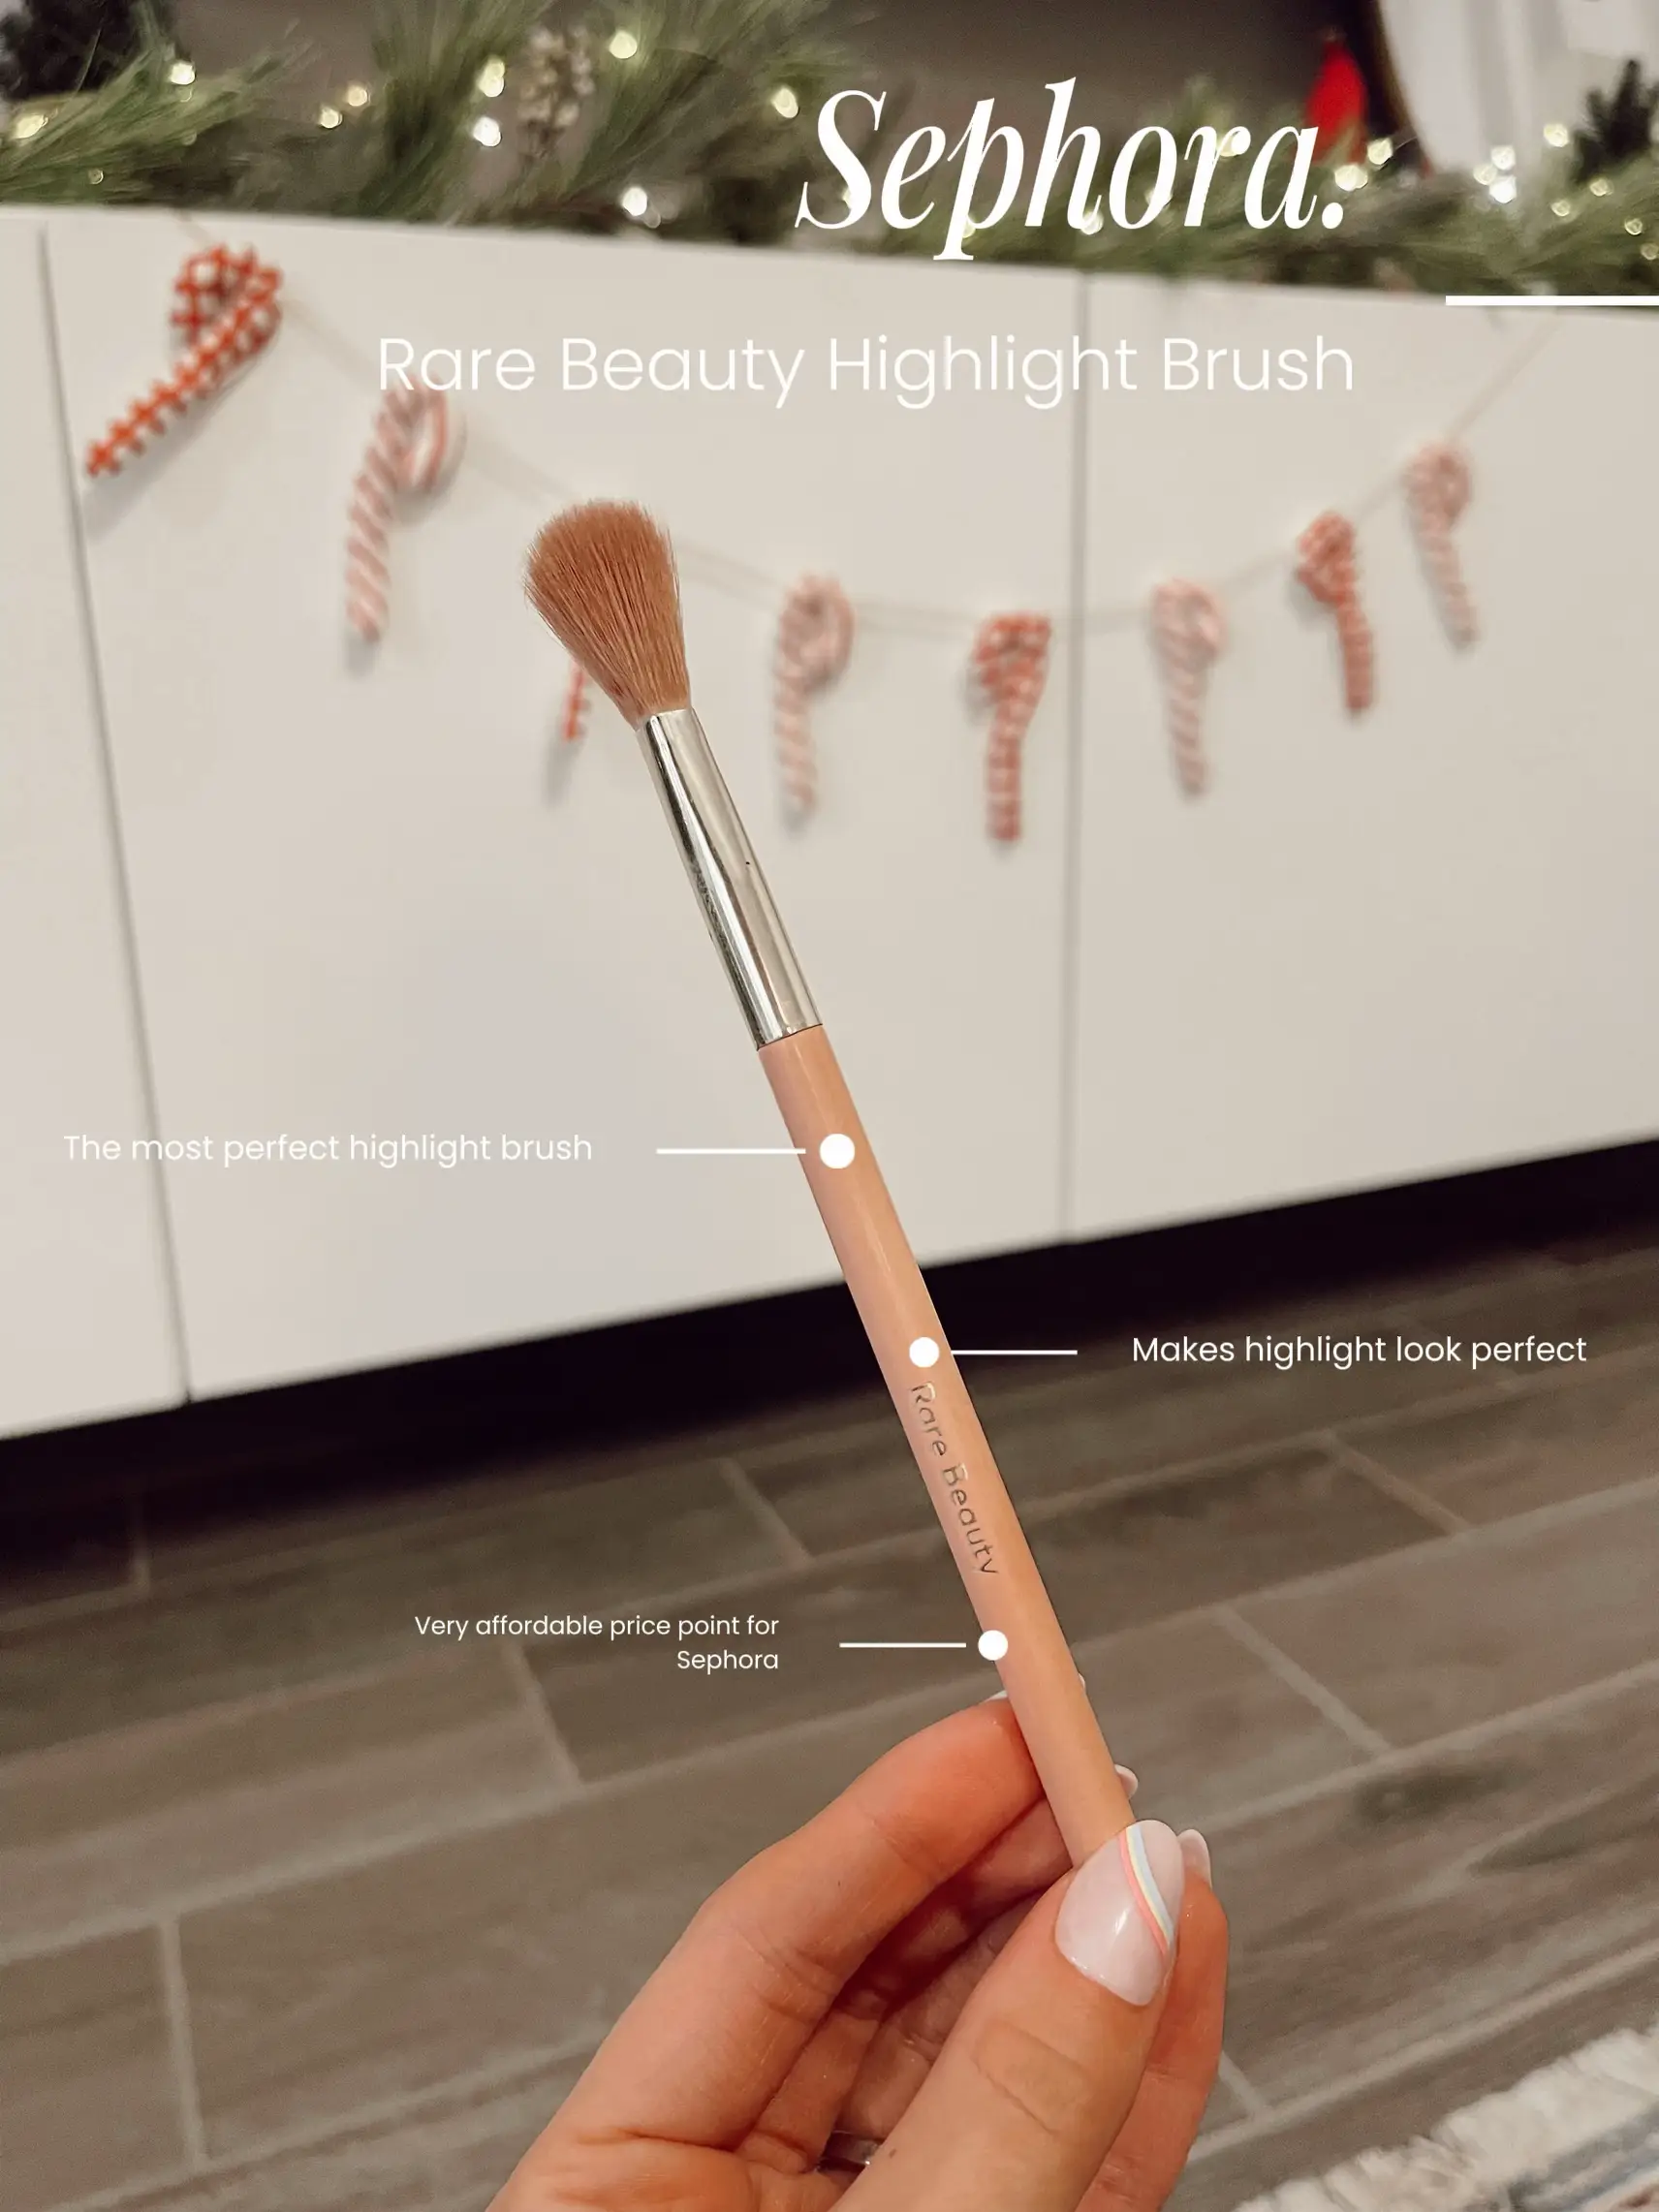  A hand holding a brush with a price of $19.00.